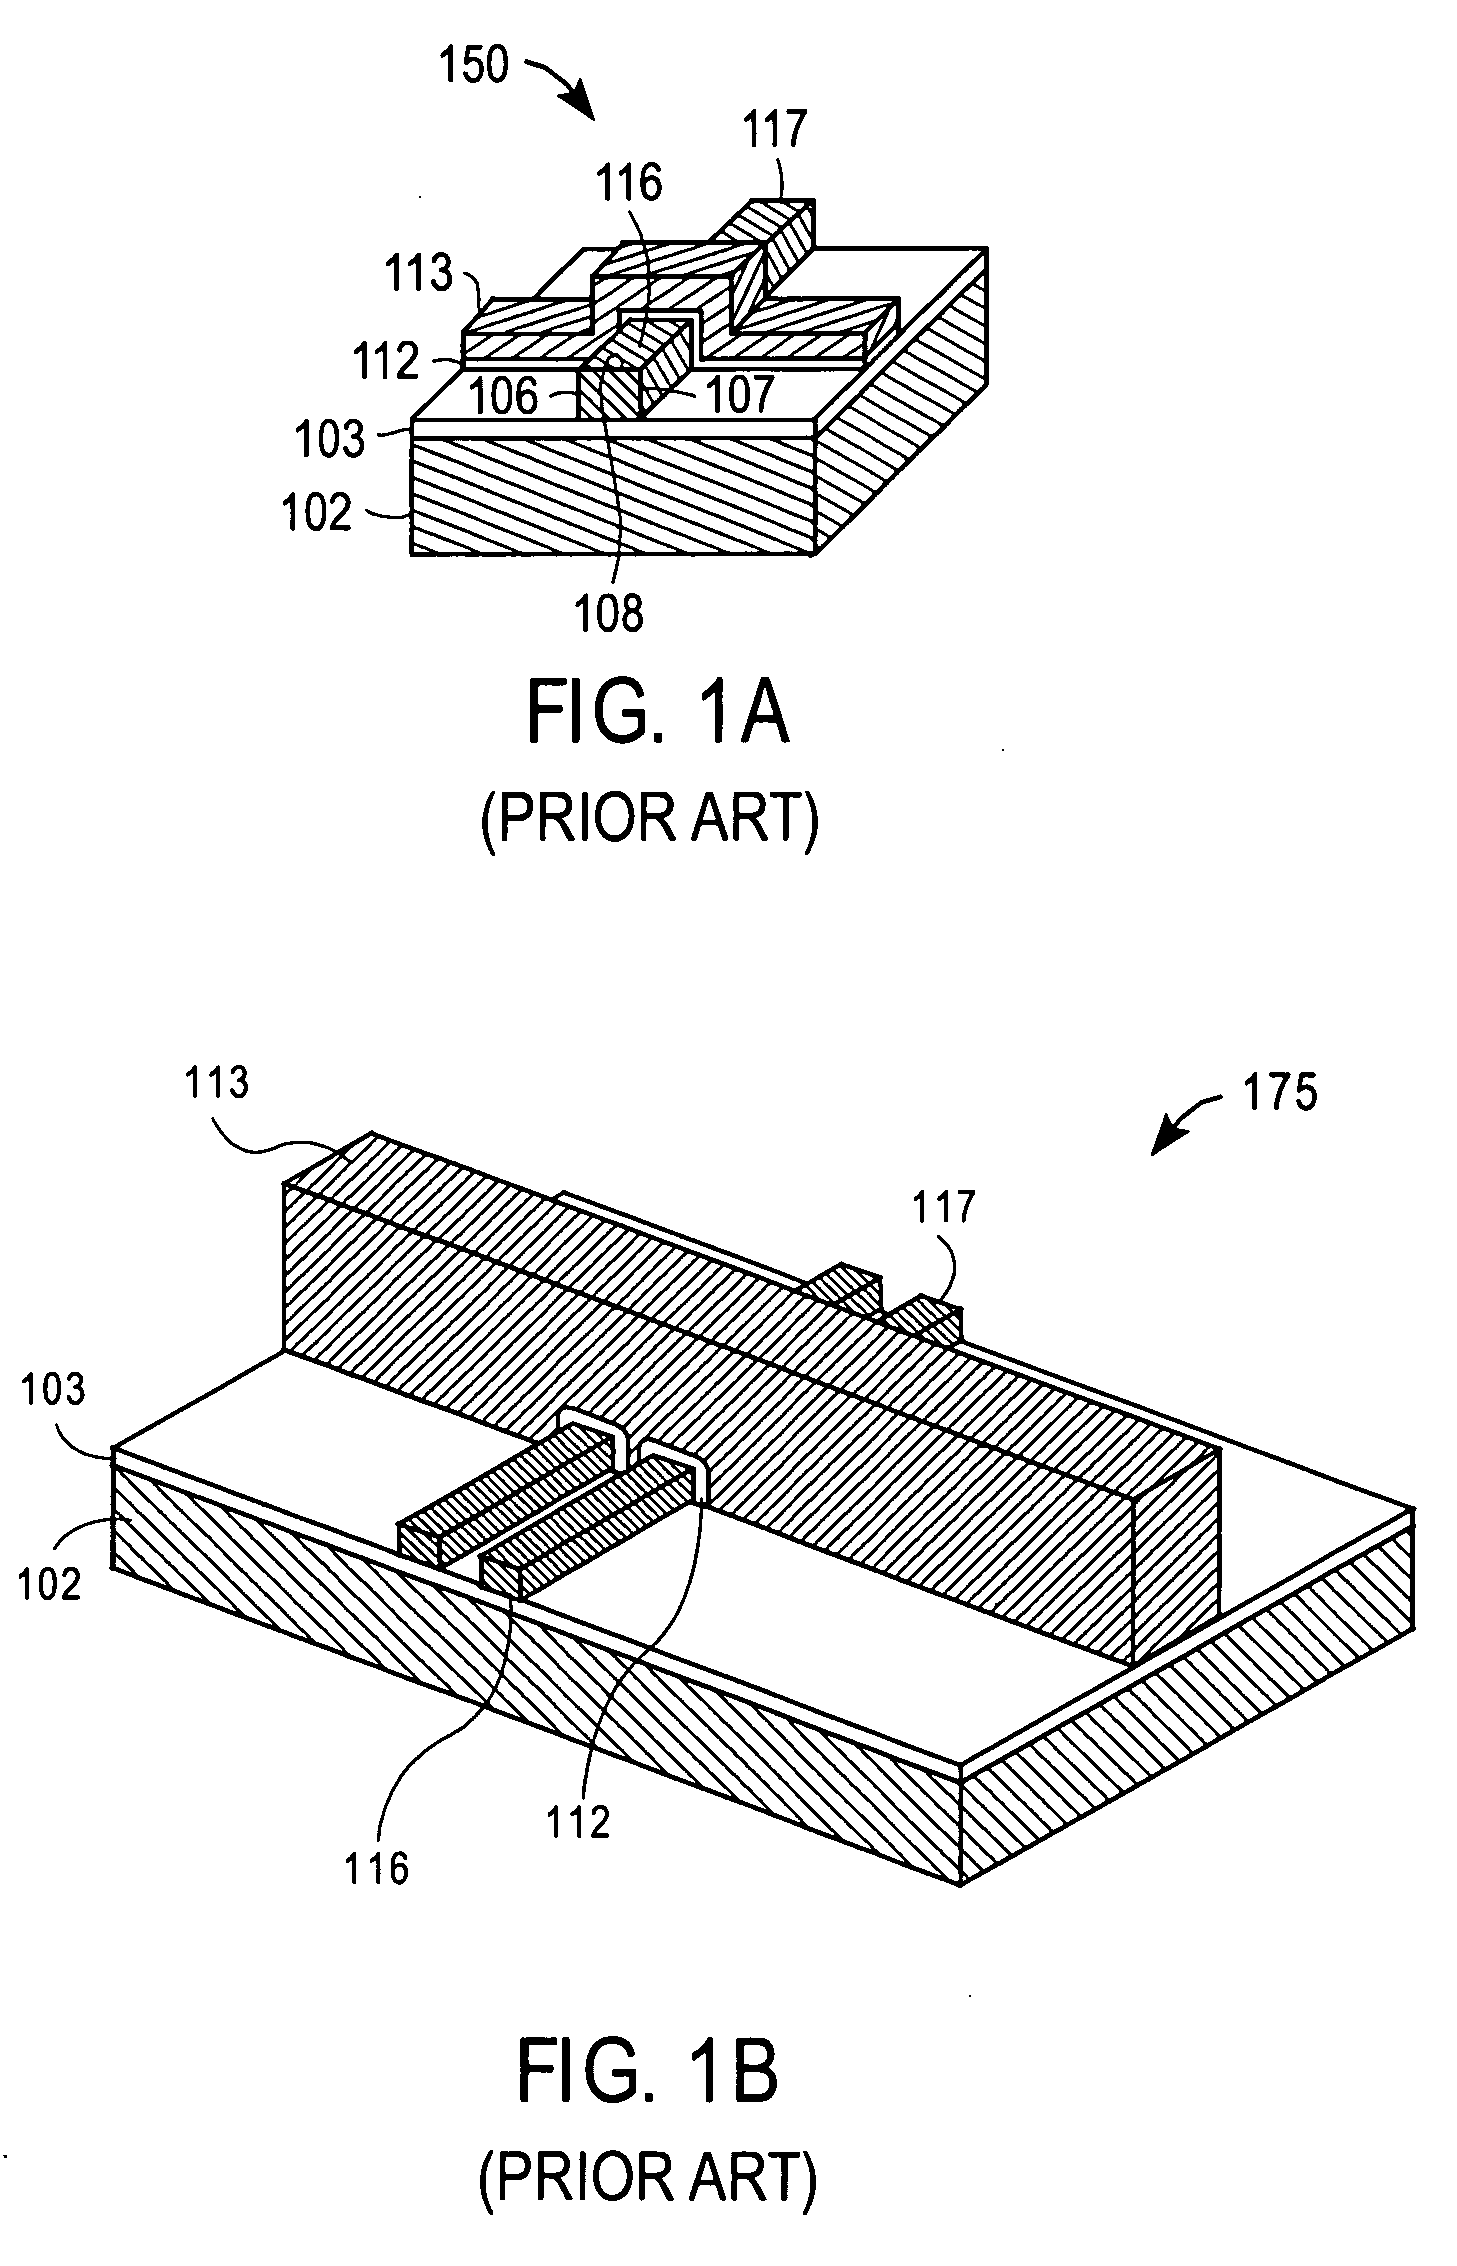 SRAM and logic transistors with variable height multi-gate transistor architecture